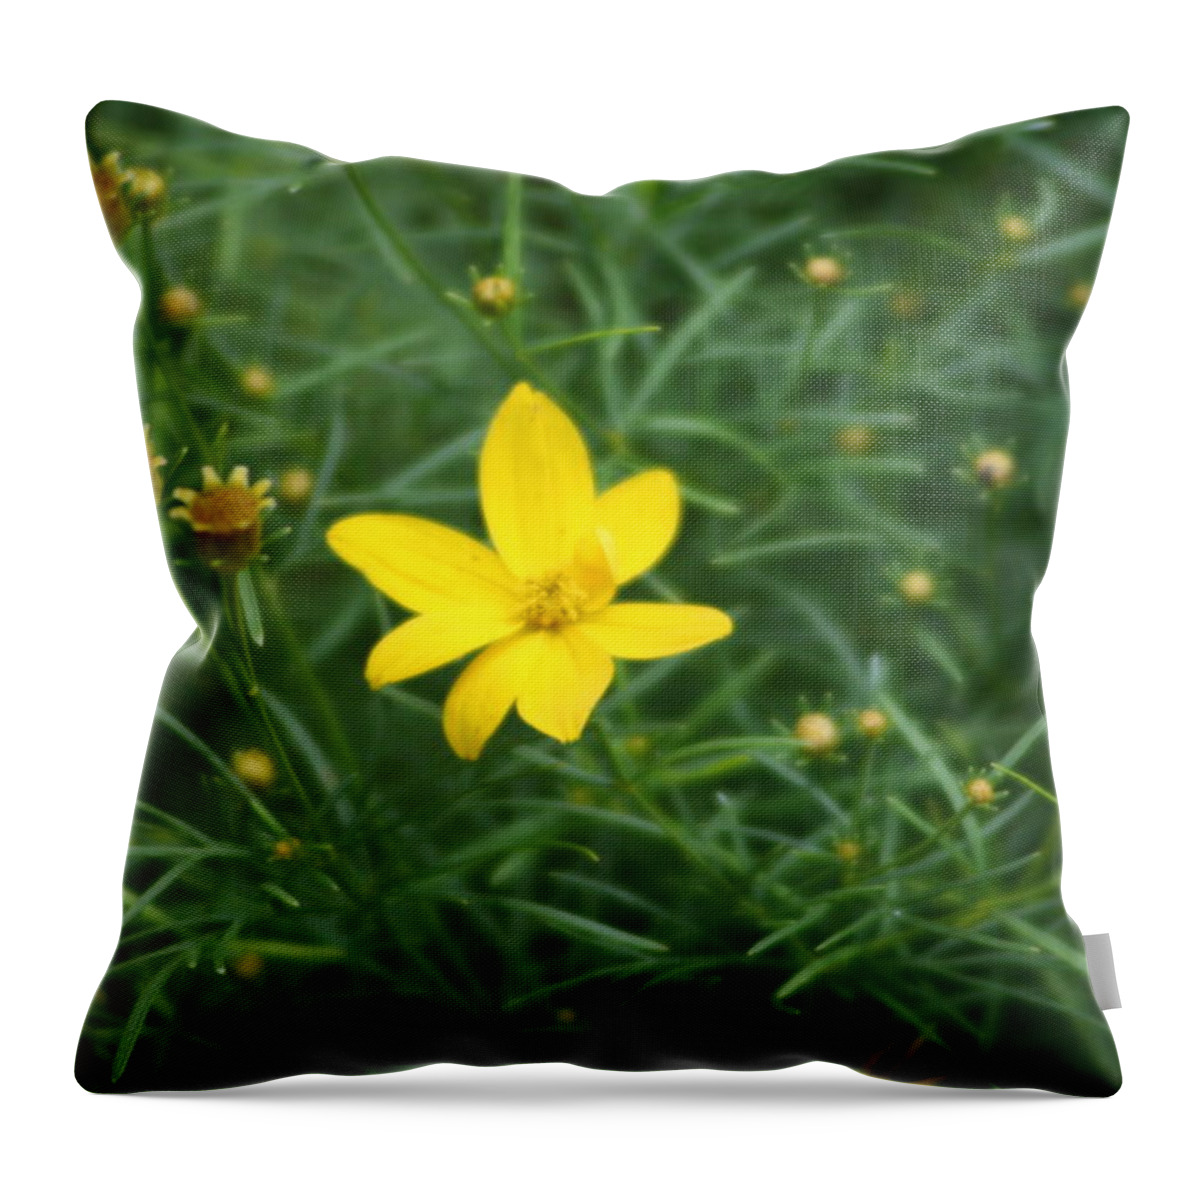 Photo Throw Pillow featuring the photograph Littlest Daisies by Barbara S Nickerson